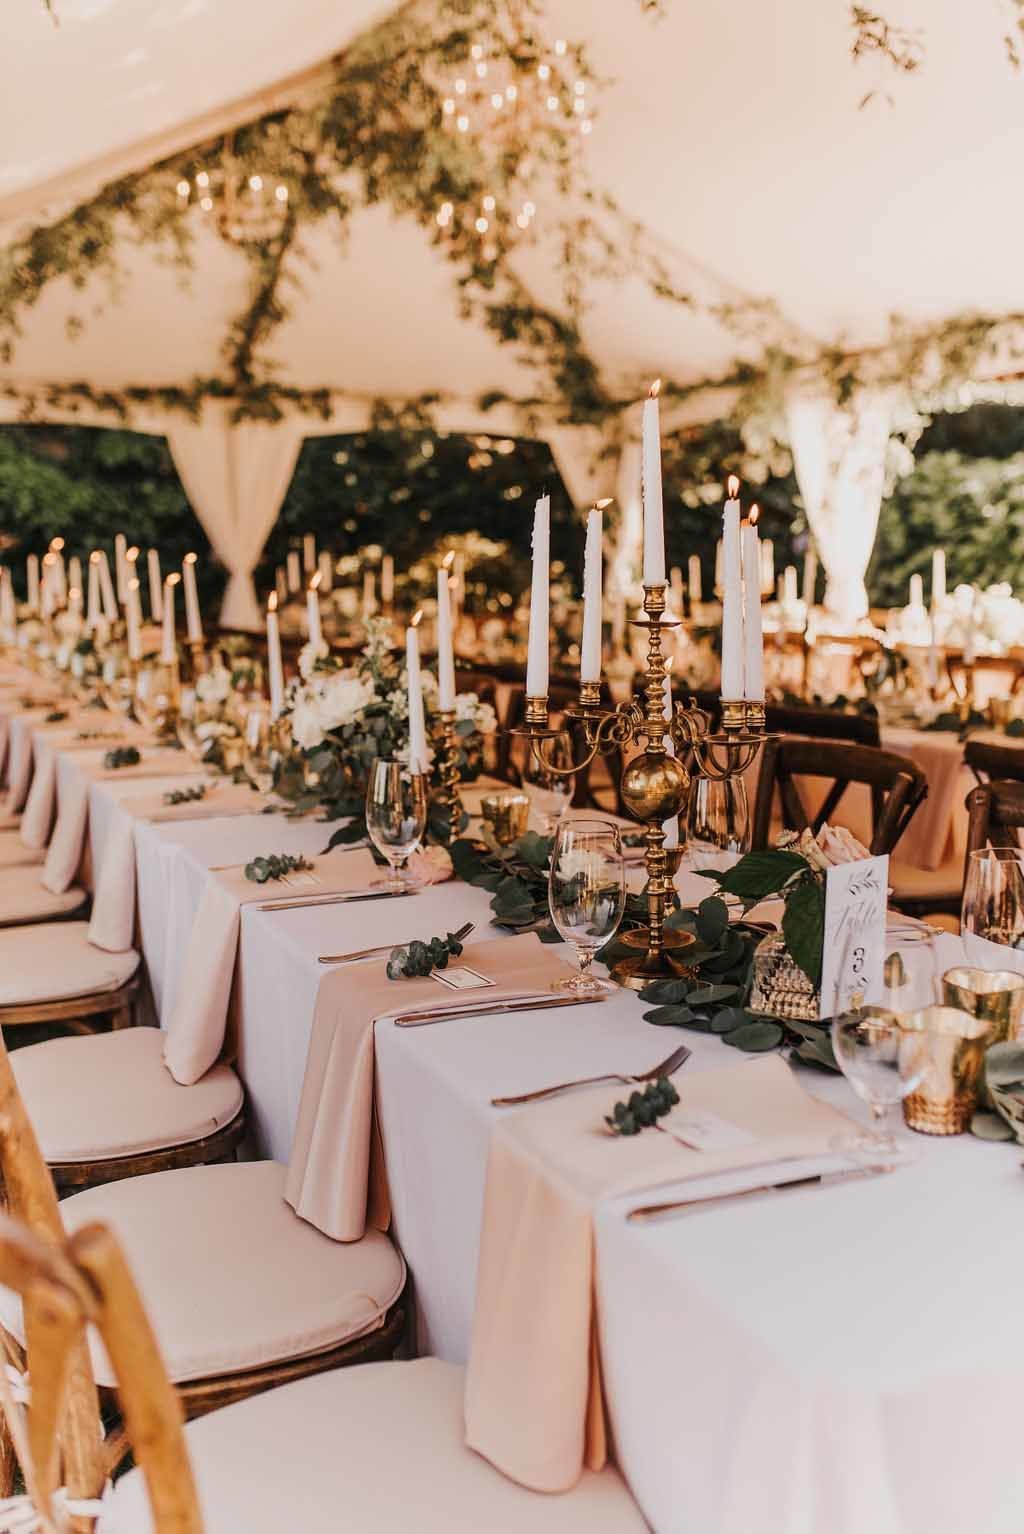 wedding reception with long tables, vineyard chairs, and greenery garlands with taper candles as centerpieces